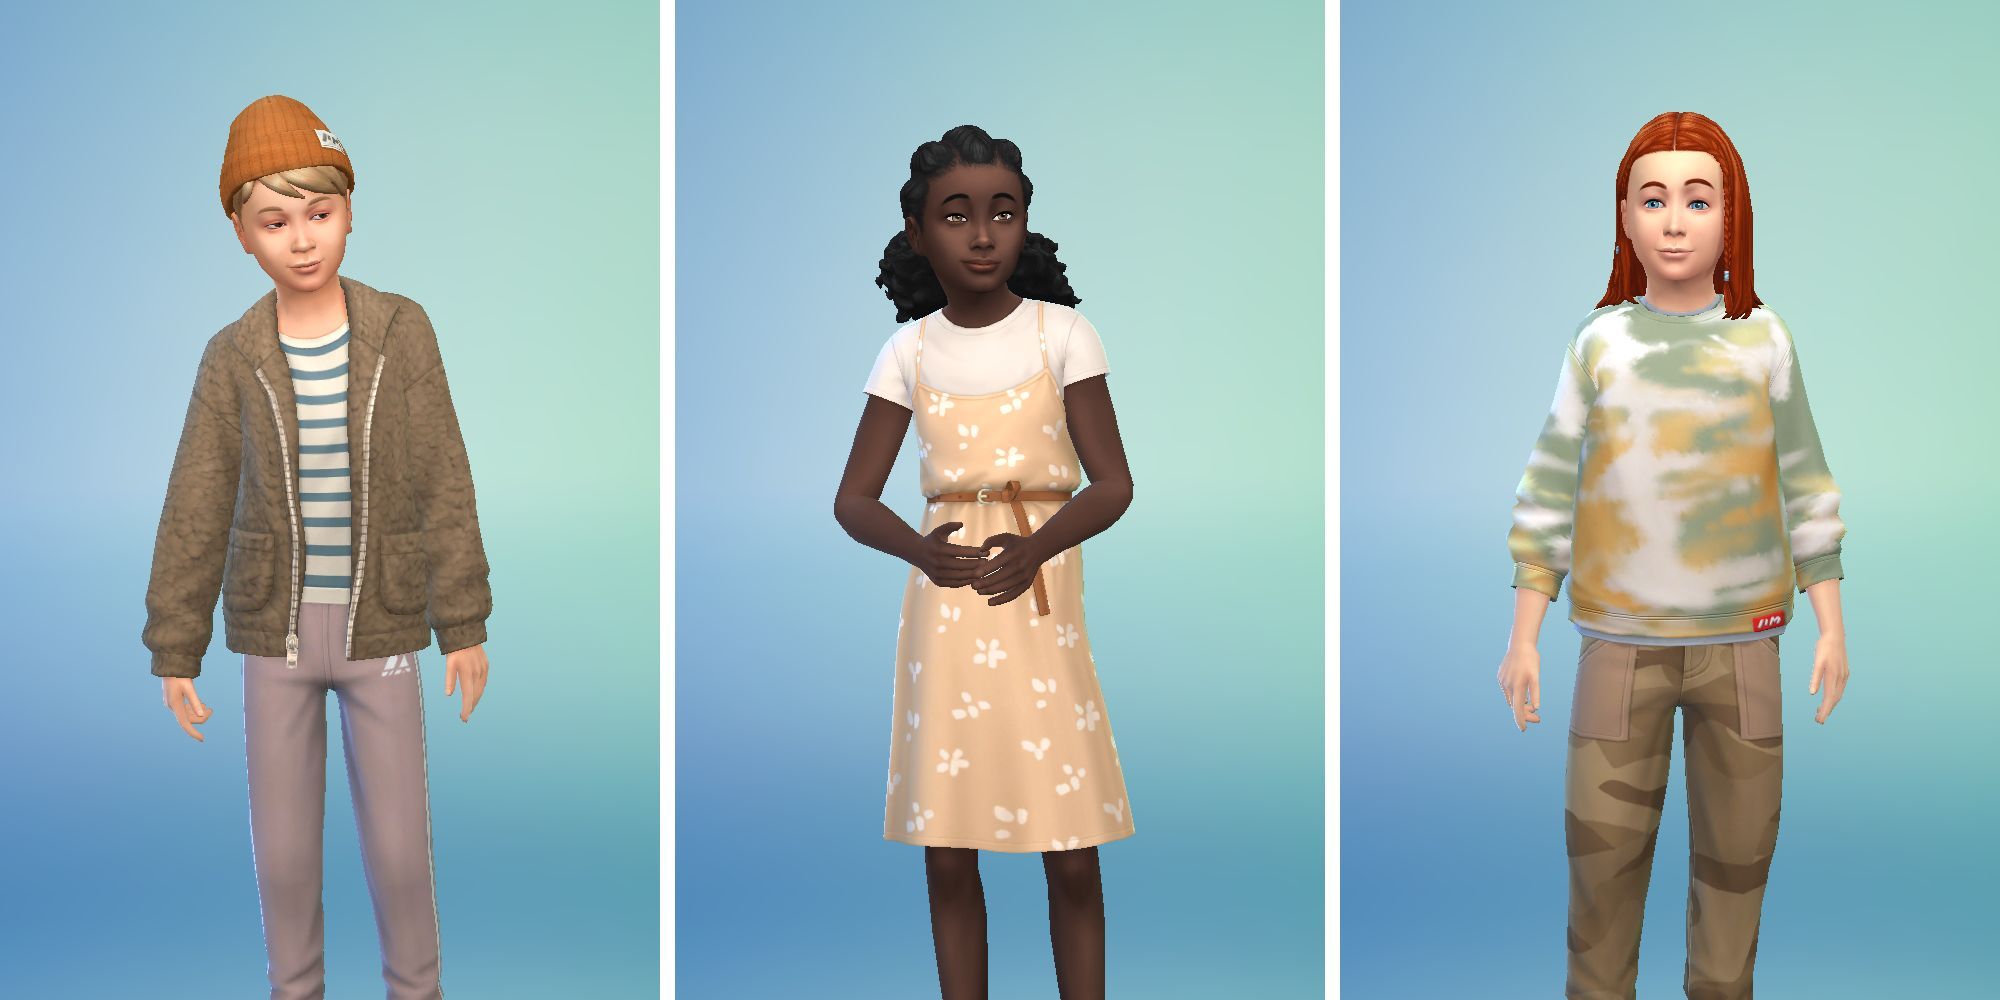 Three images of child Sims in Sims 4 Create A Sim. One in an orange hat and fuzzy brown coat, one in a yellow dress, and a third in a tie dye shirt